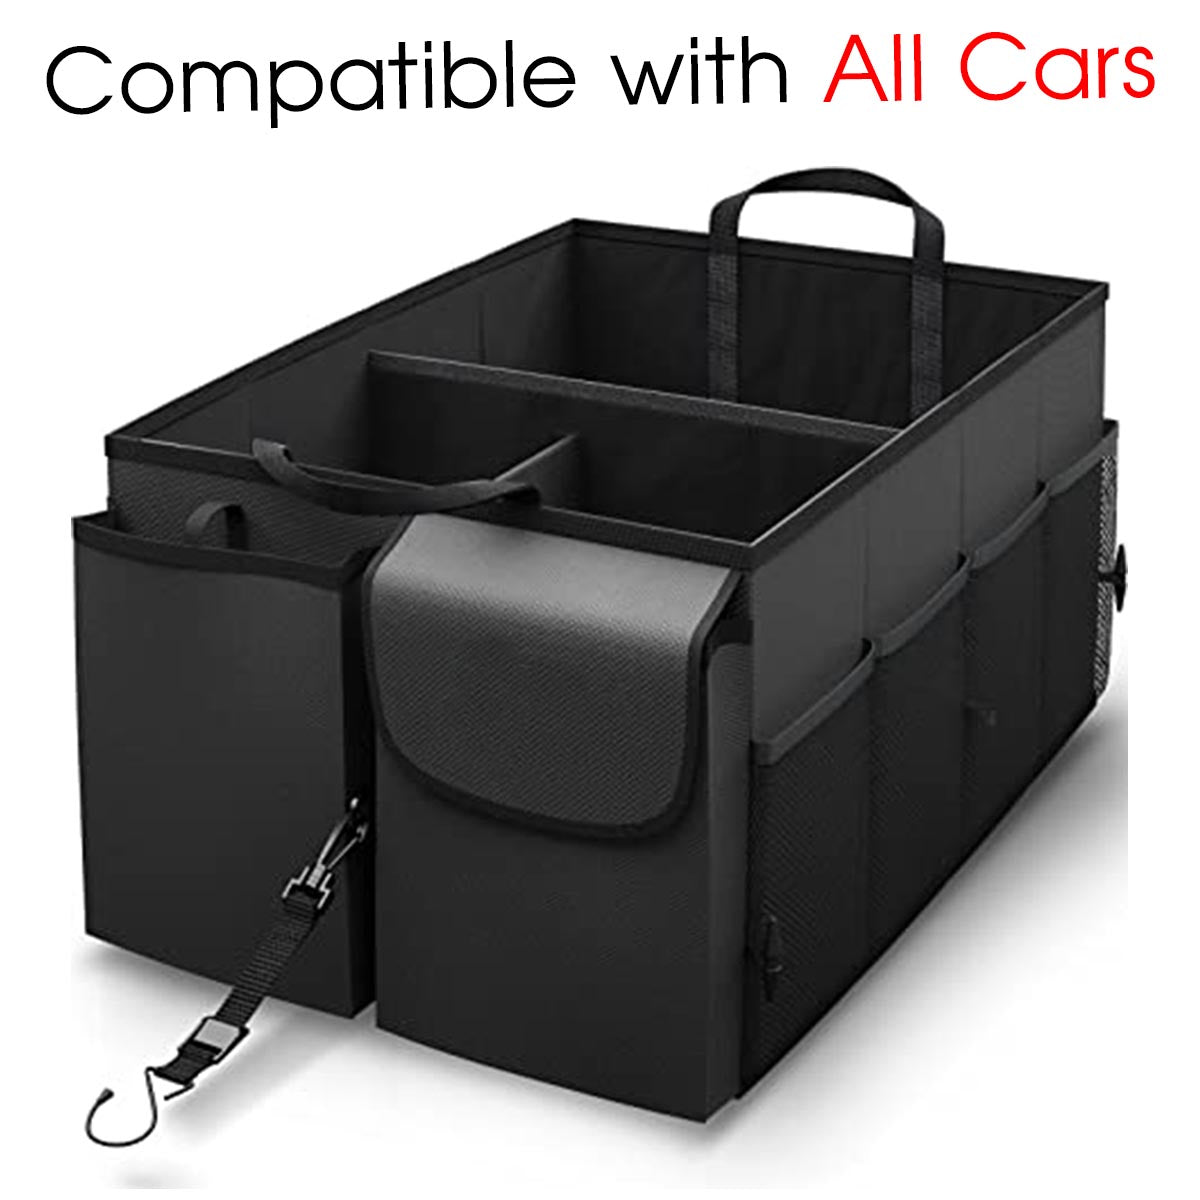 Car Trunk Organizer - Collapsible, Custom fit for All Cars, Multi-Compartment Automotive SUV Car Organizer for Storage w/ Adjustable Straps - Car Accessories for Women and Men MY12993